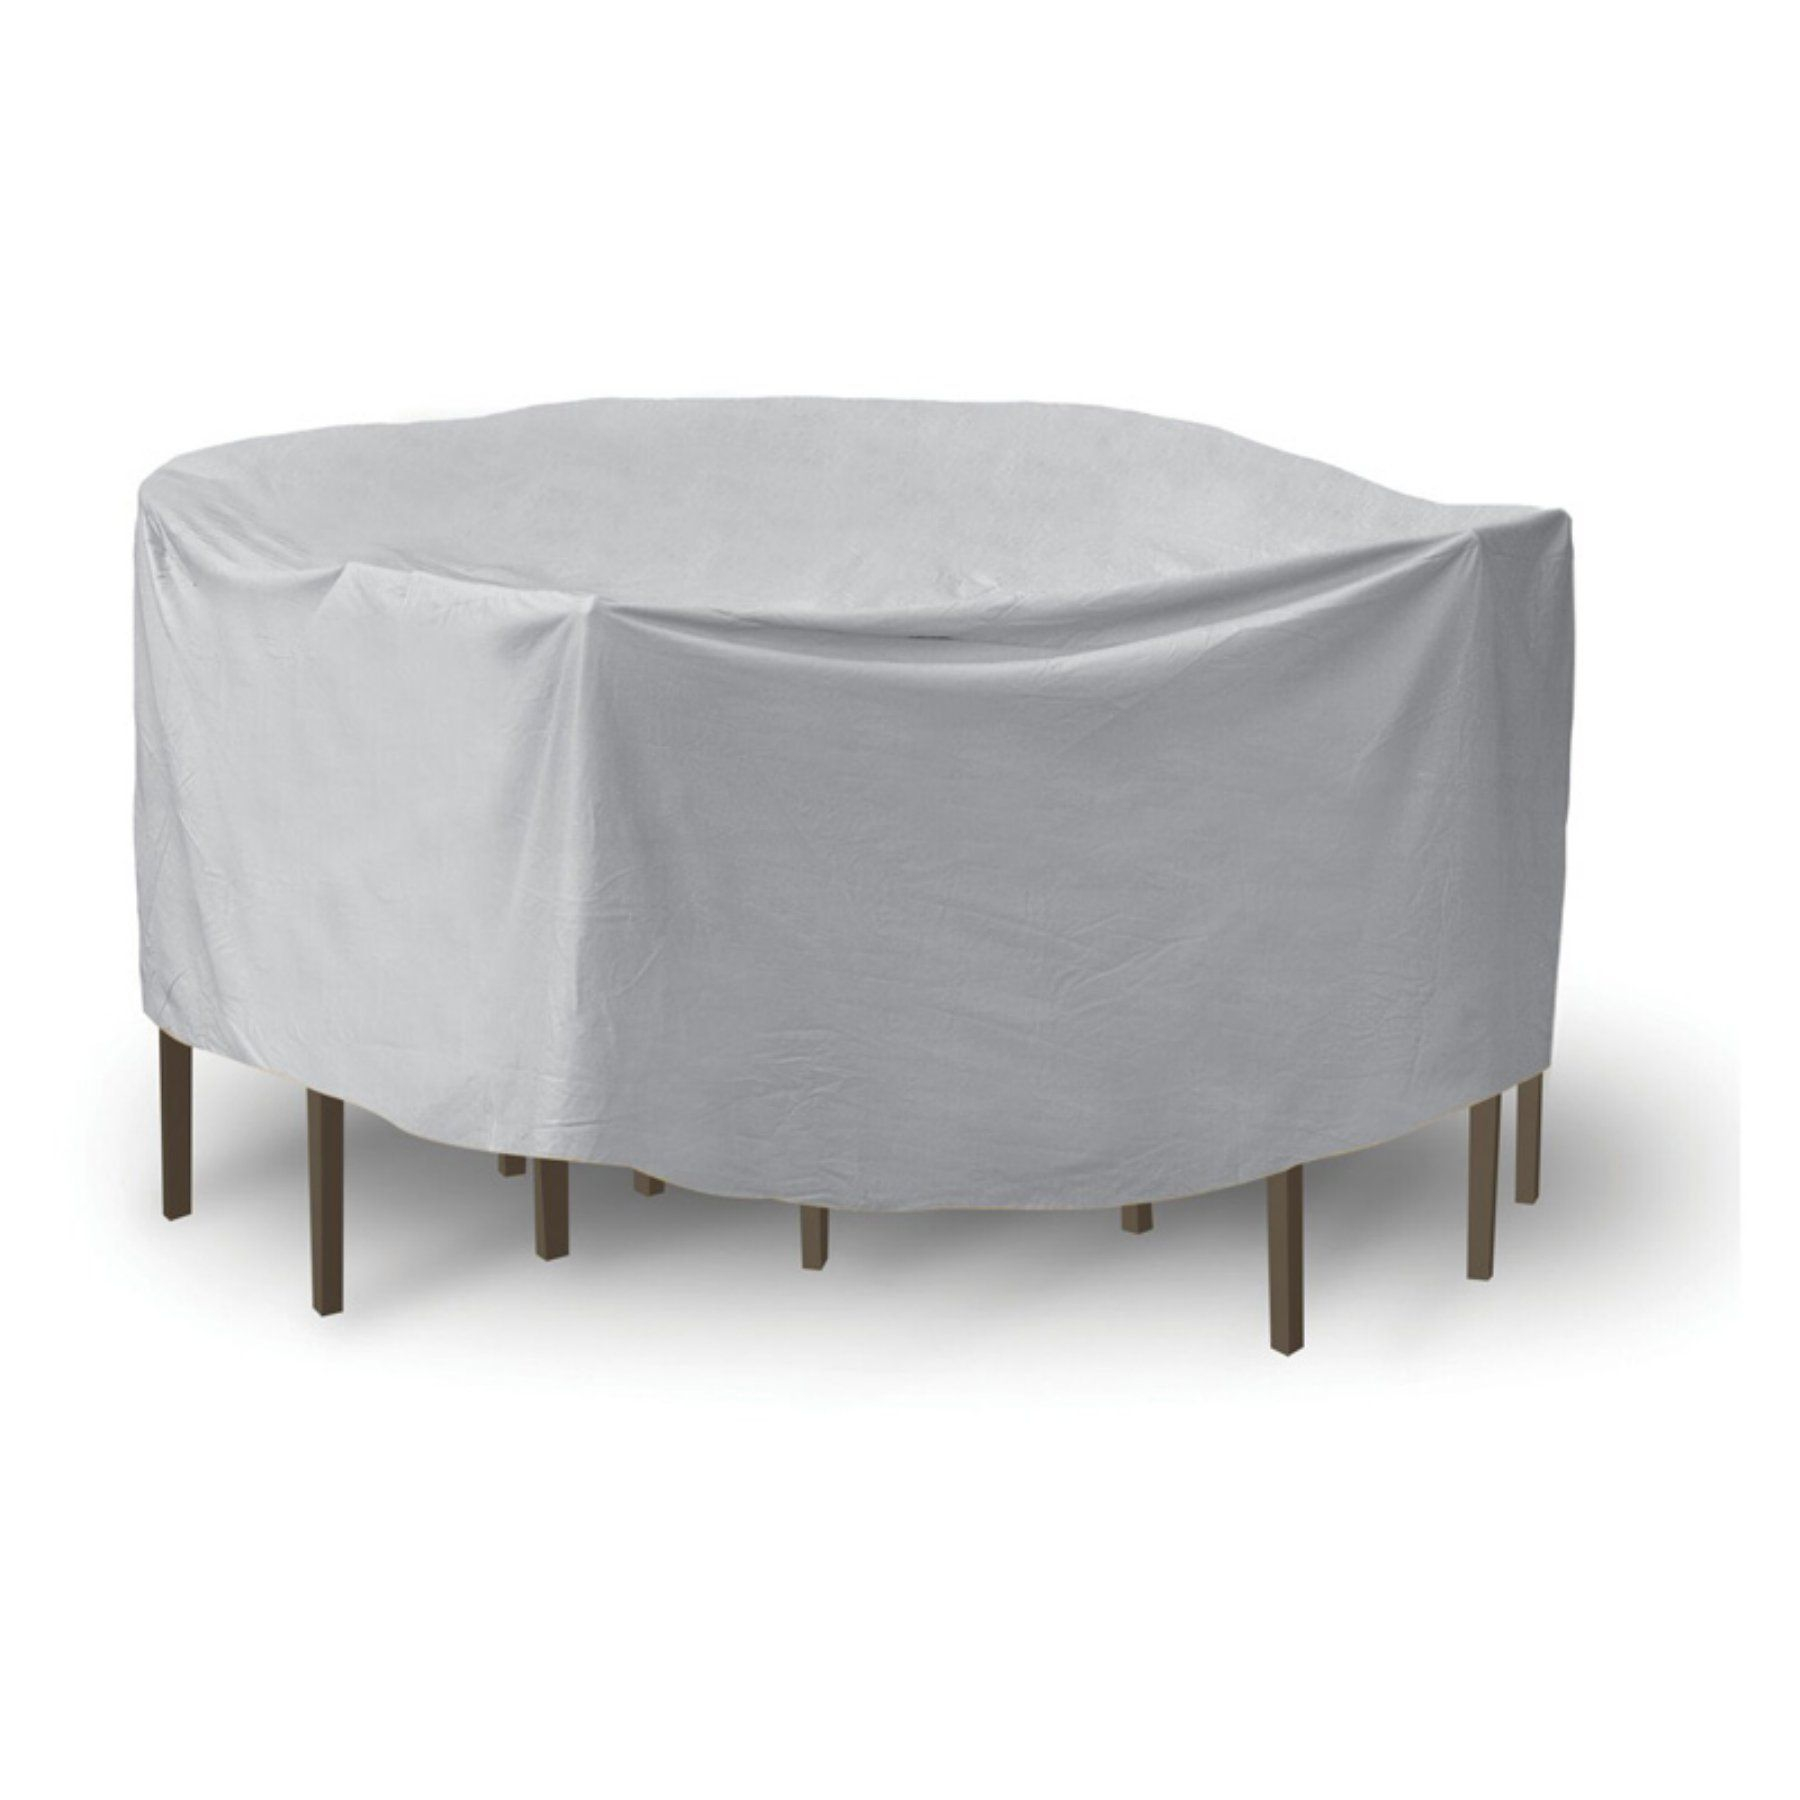 Pci Adco Round Patio Dining Set Cover 1342 Round pertaining to proportions 1800 X 1800